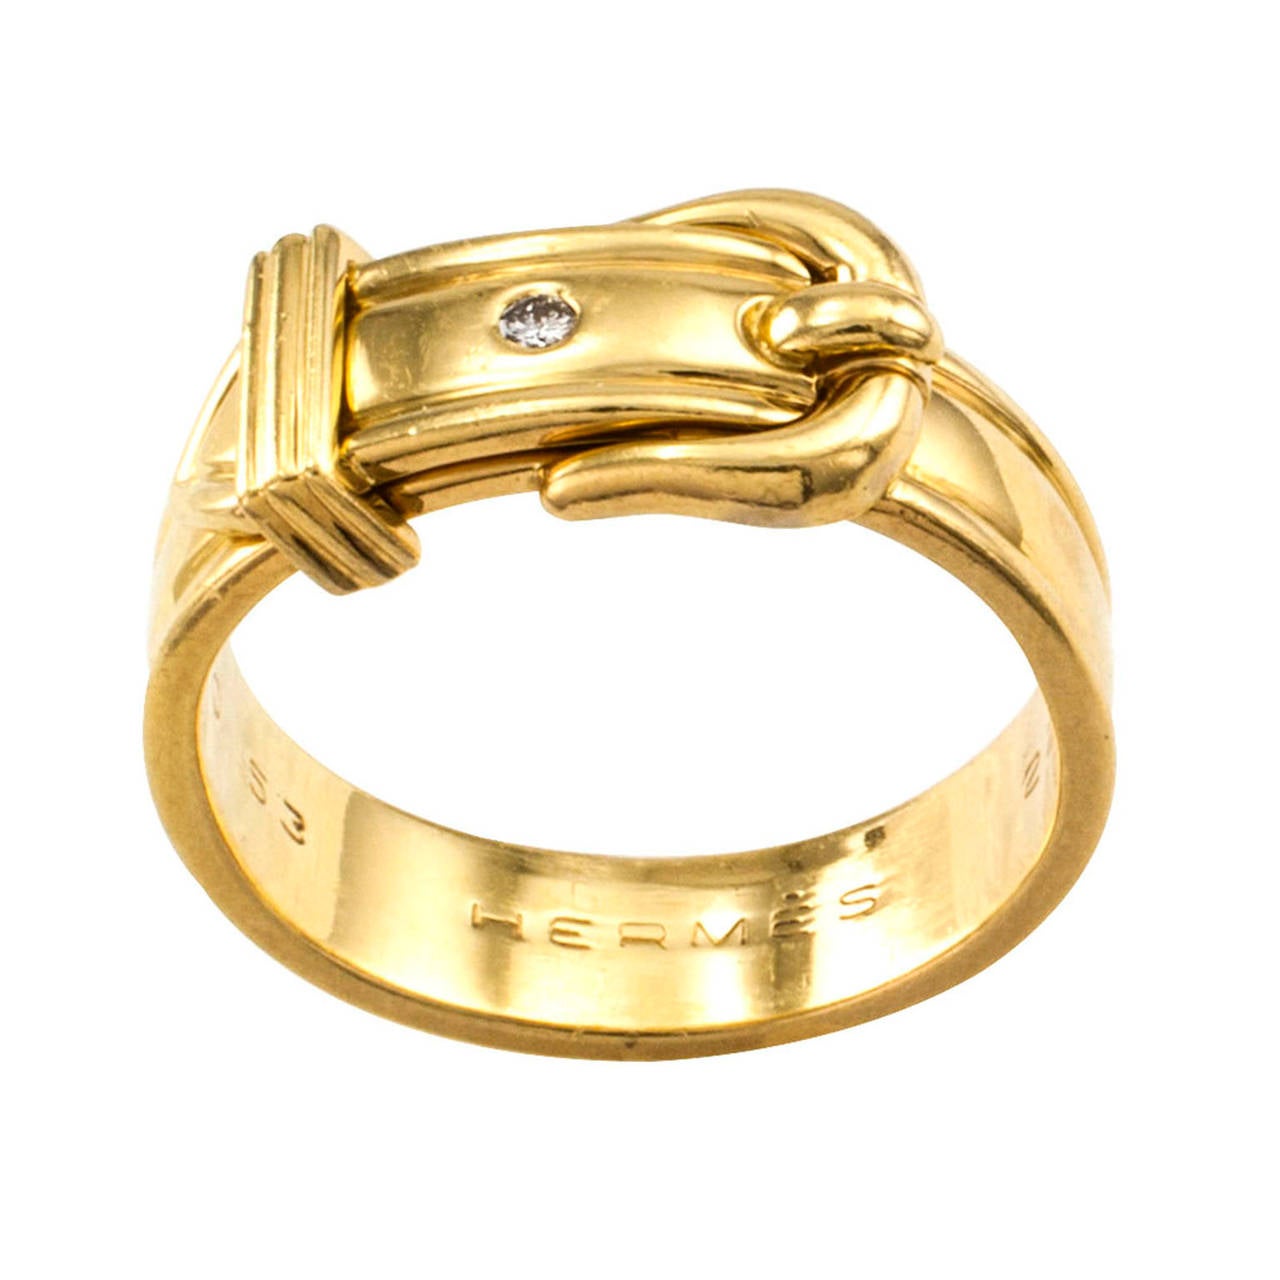 Hermes Buckle Ring Band

A traditional buckle style ring with a subtle je ne sais quoi that comes across as something that is special and luxurious.  And it is.  Dotted with a burnish-set diamond weighing approximately 0.02 carat, mounted in 18